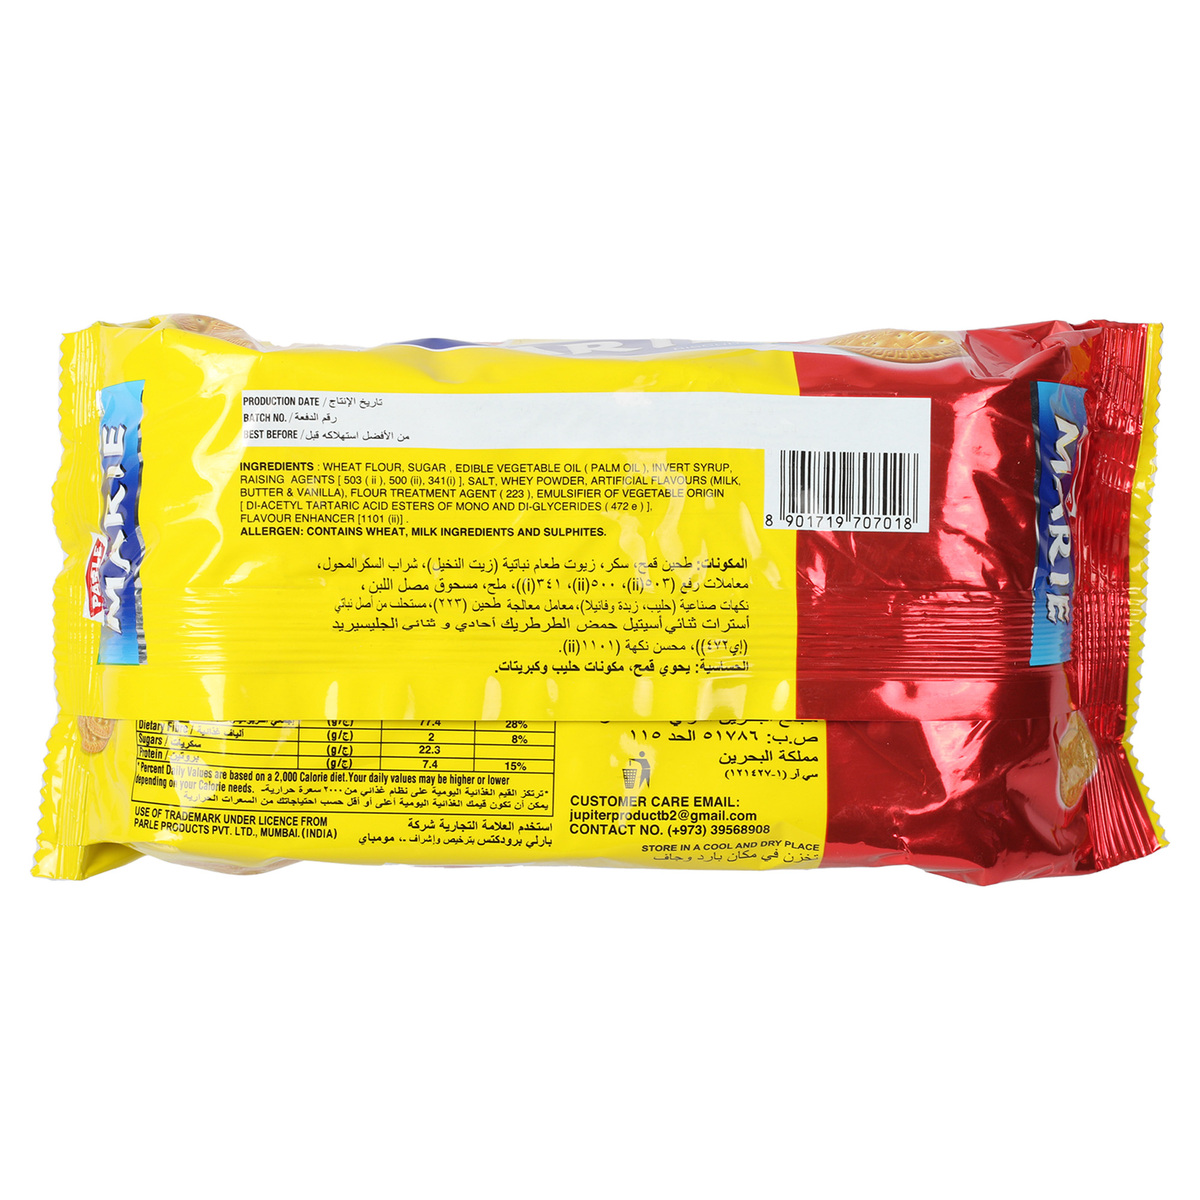 Parle Marie Biscuits Wheat, 255 g